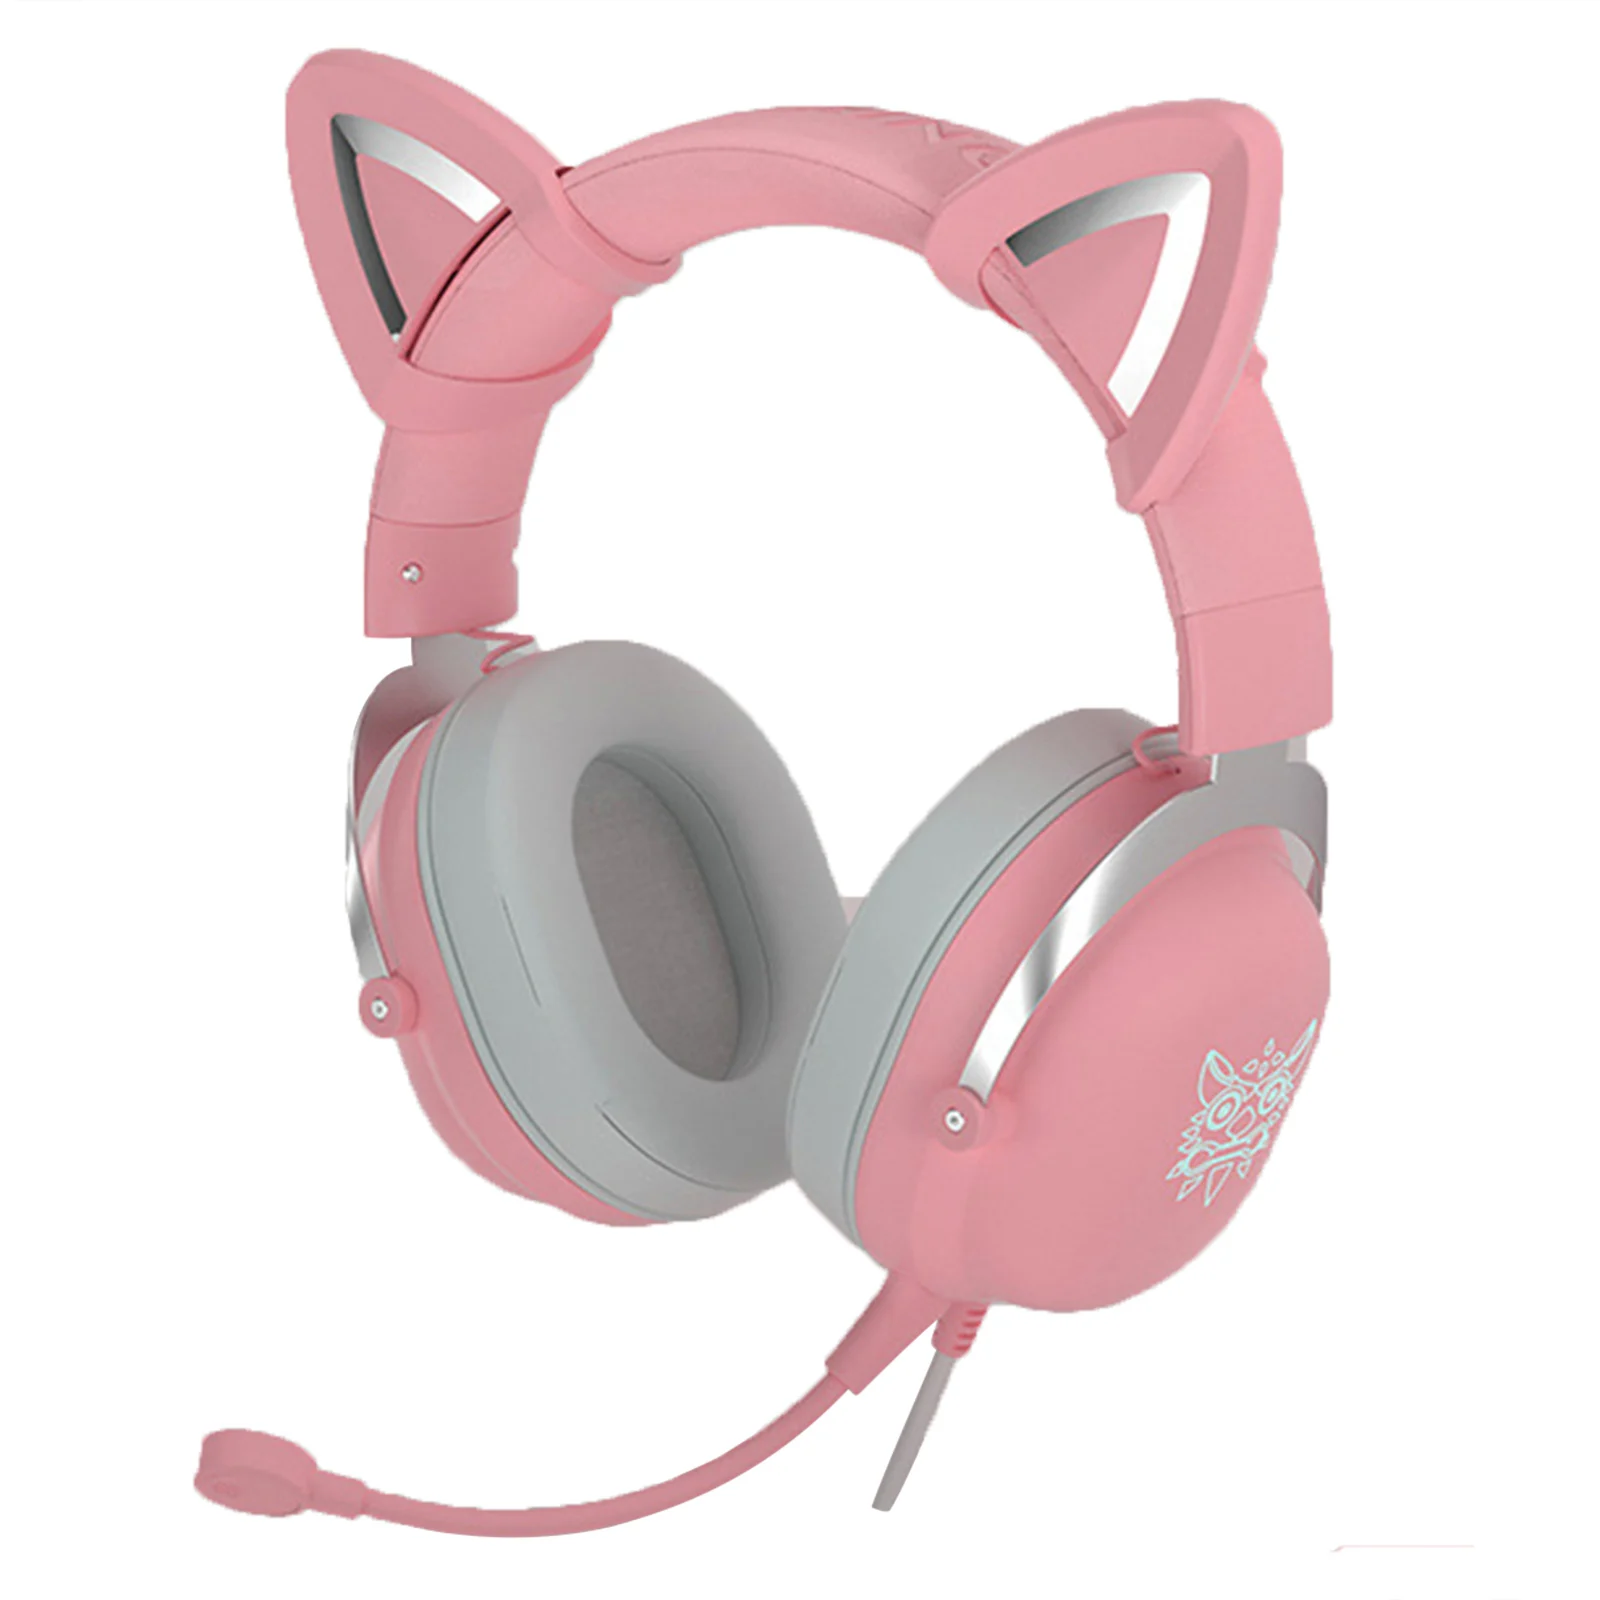 

ONIKUMA X11 Gaming Headset With Removable Cat Ears For PS4 Switch PC Noise Cancelling Over Ear Headphone With Mic RGB Light Pink